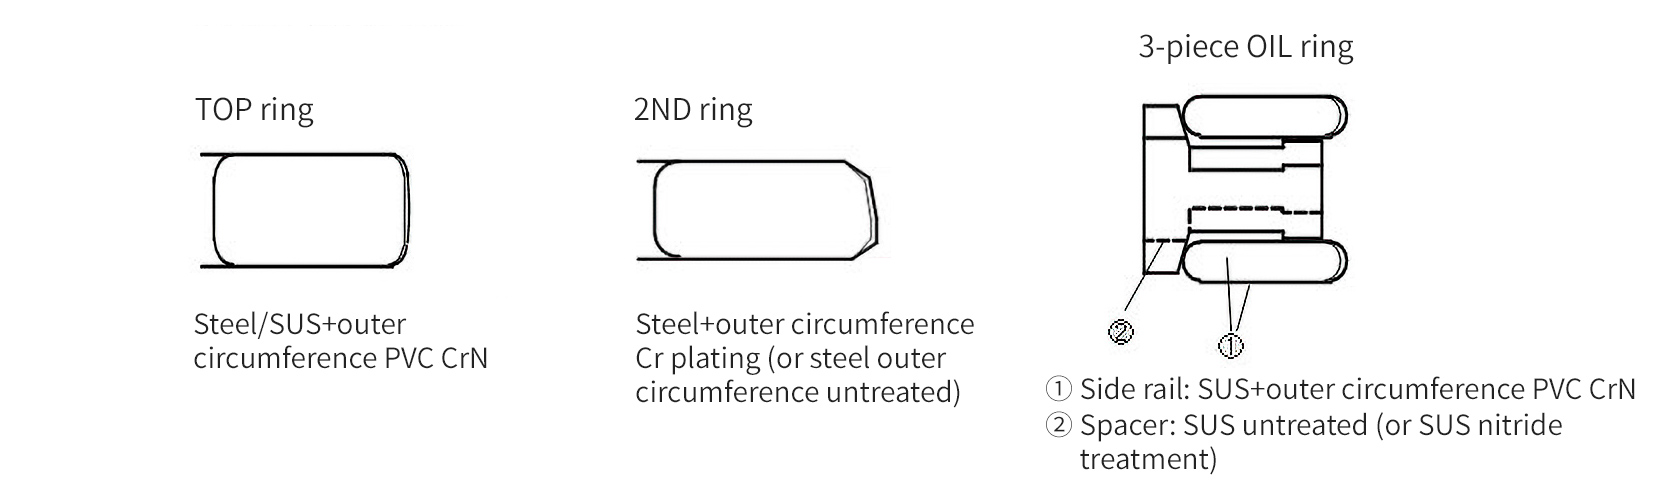 3-part composition of TOP, 2ND and OIL rings, the OIL ring is a 3-piece type